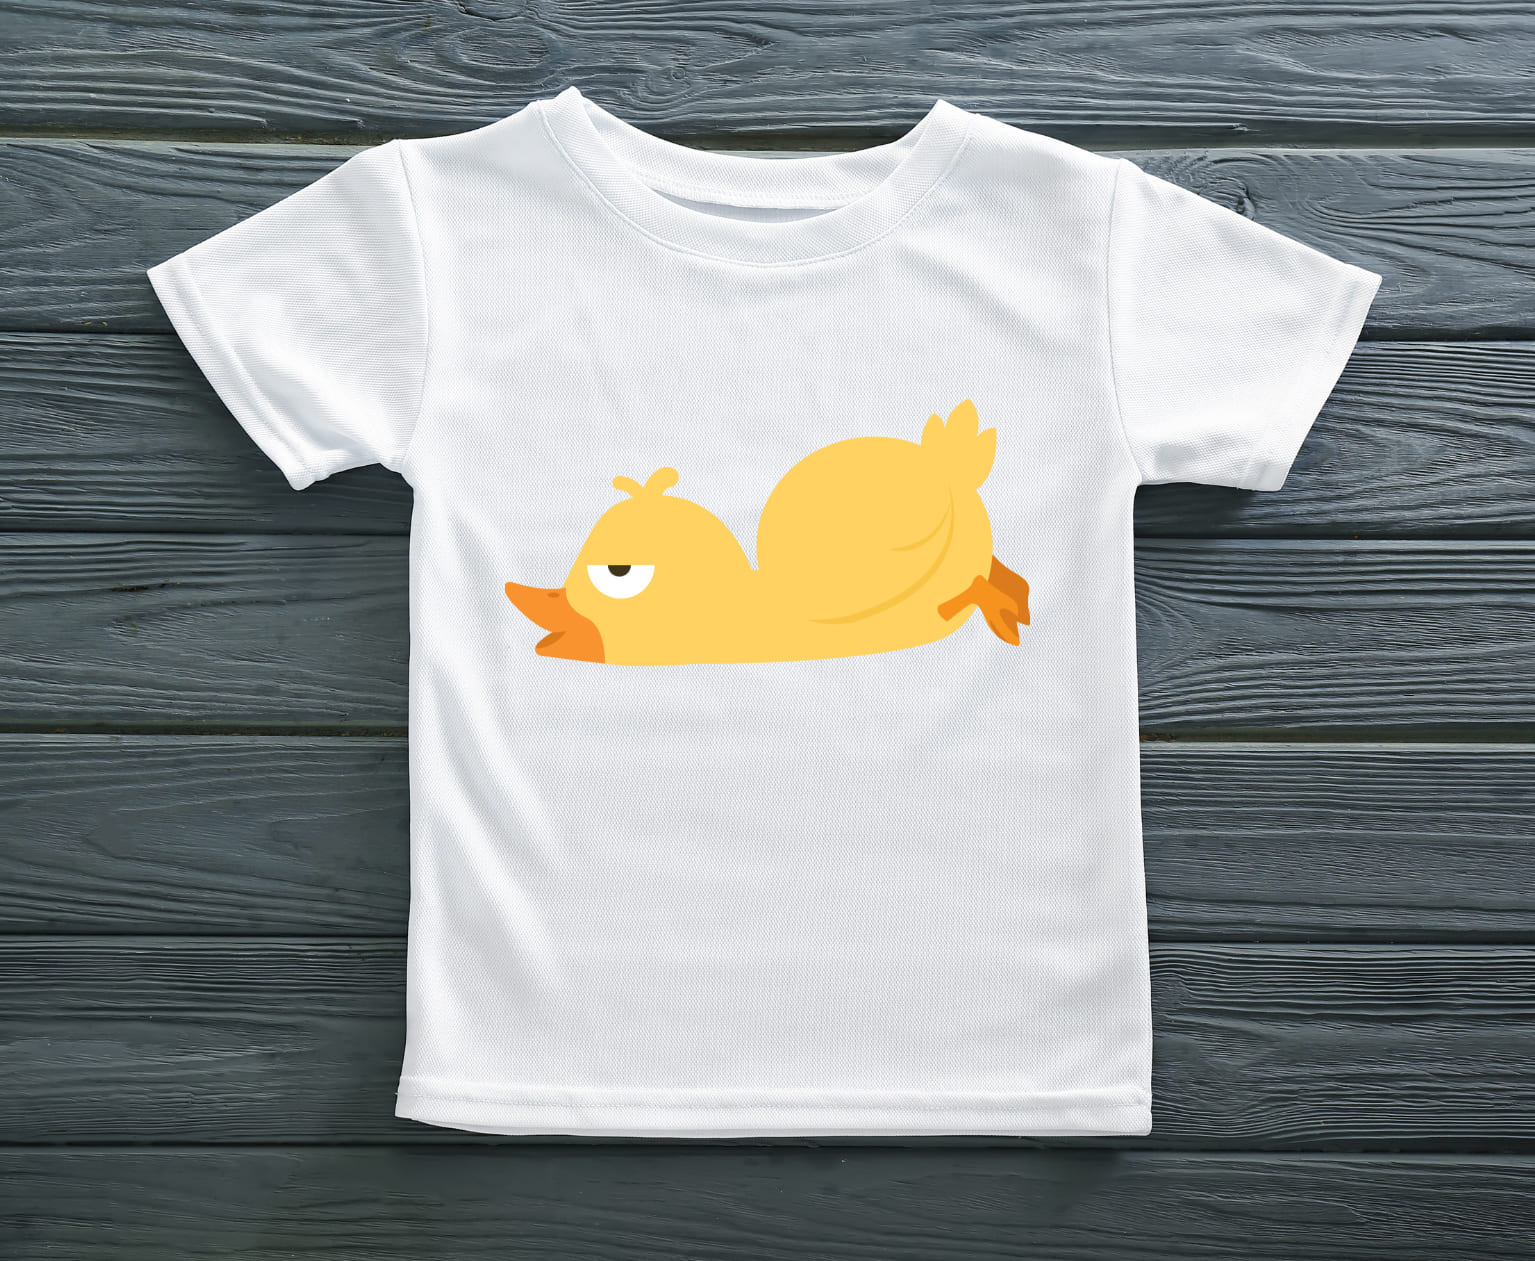 Image of white t-shirt with adorable print of a cute duck.